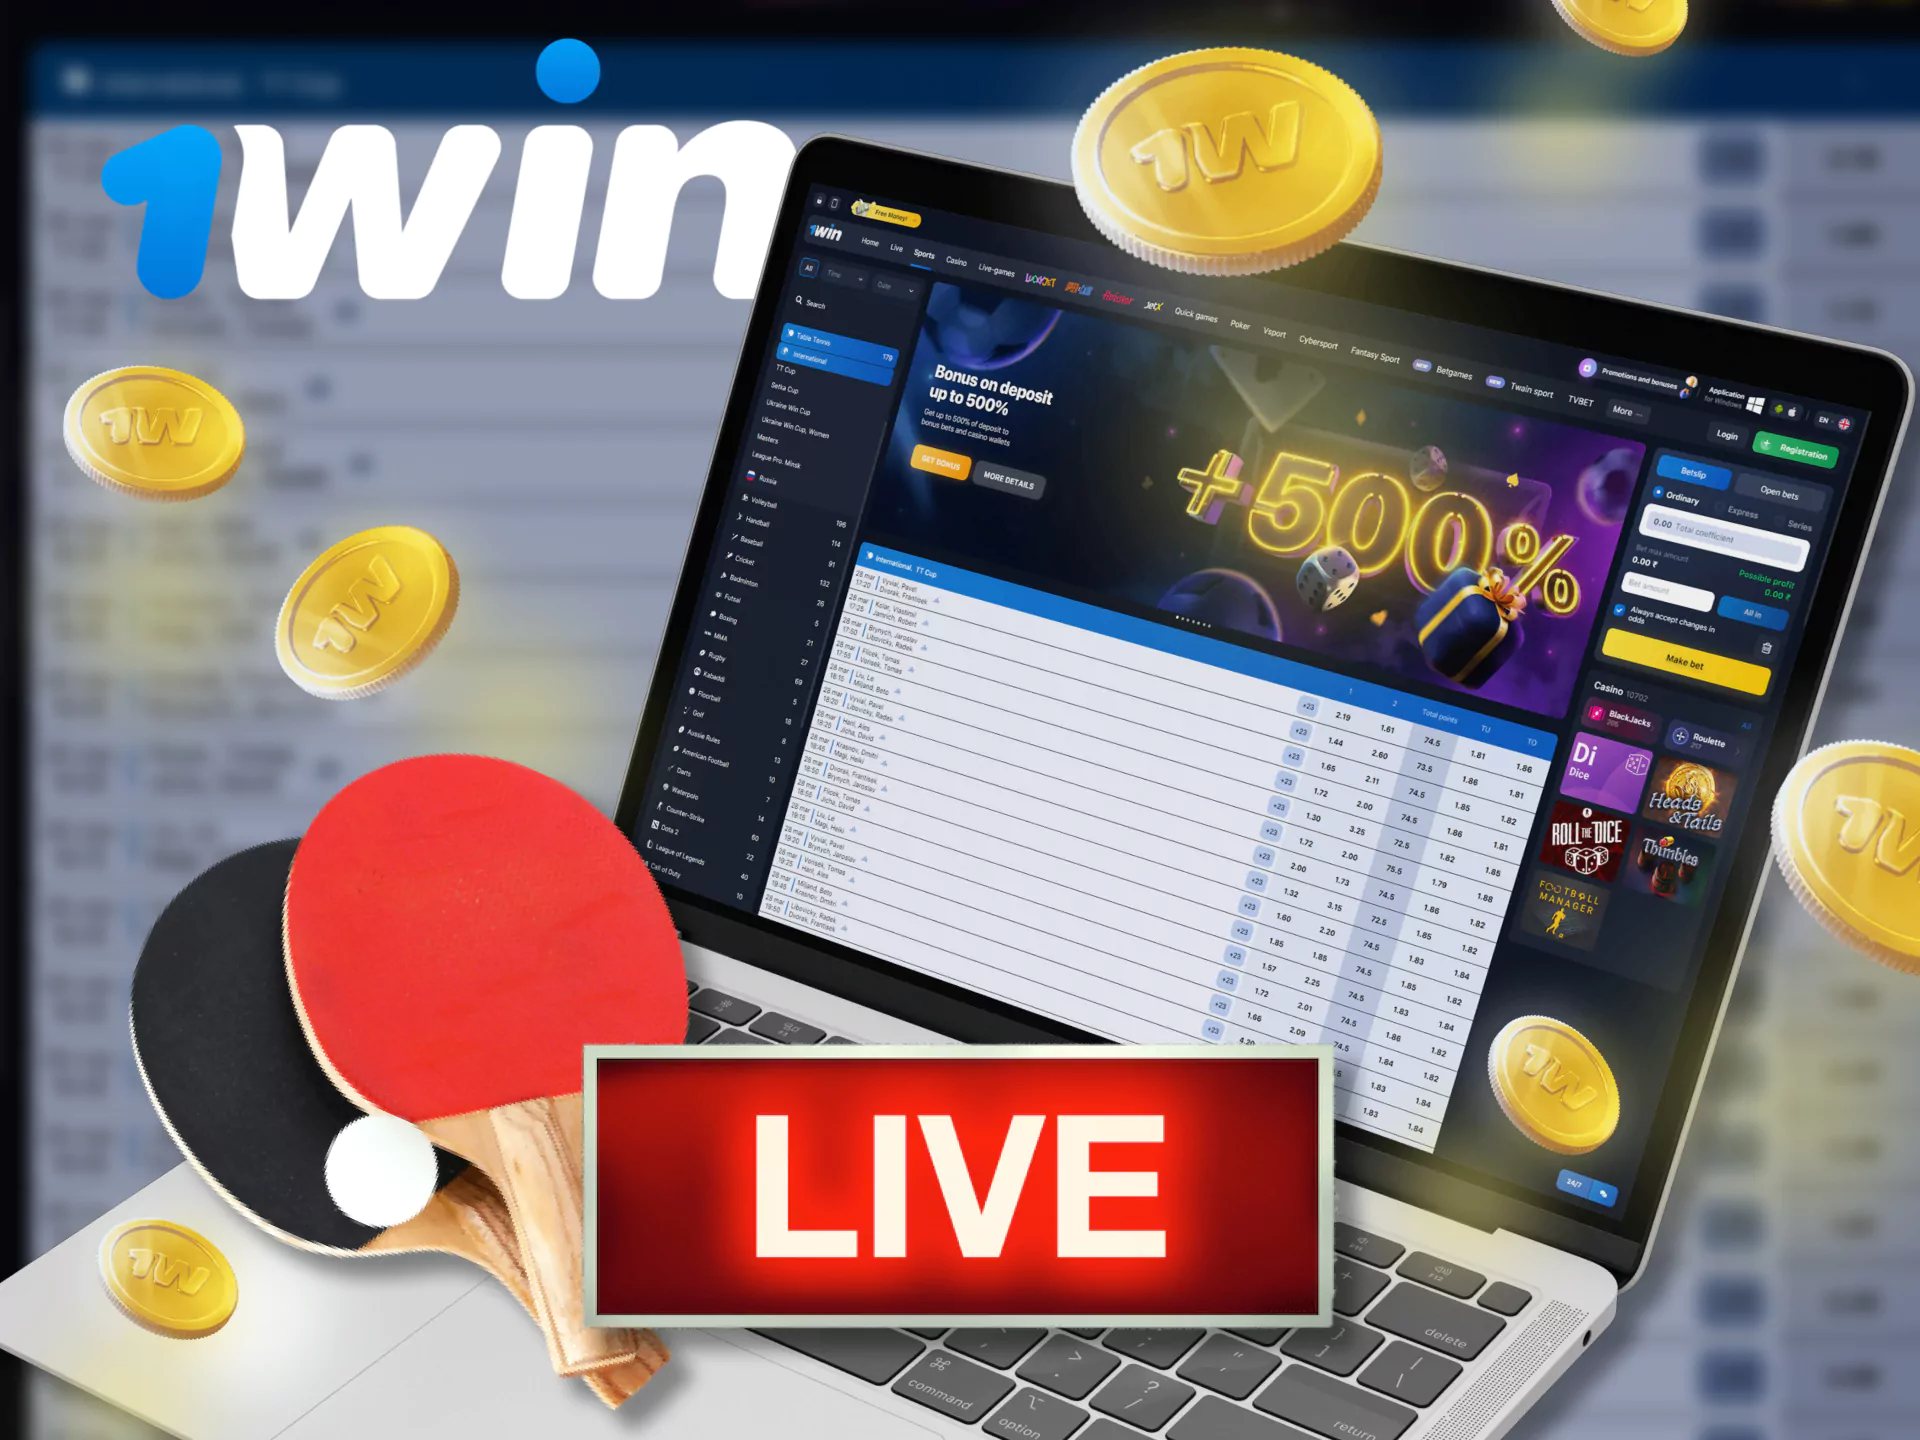 Place your bet on the table tennis match while it's in live streaming.